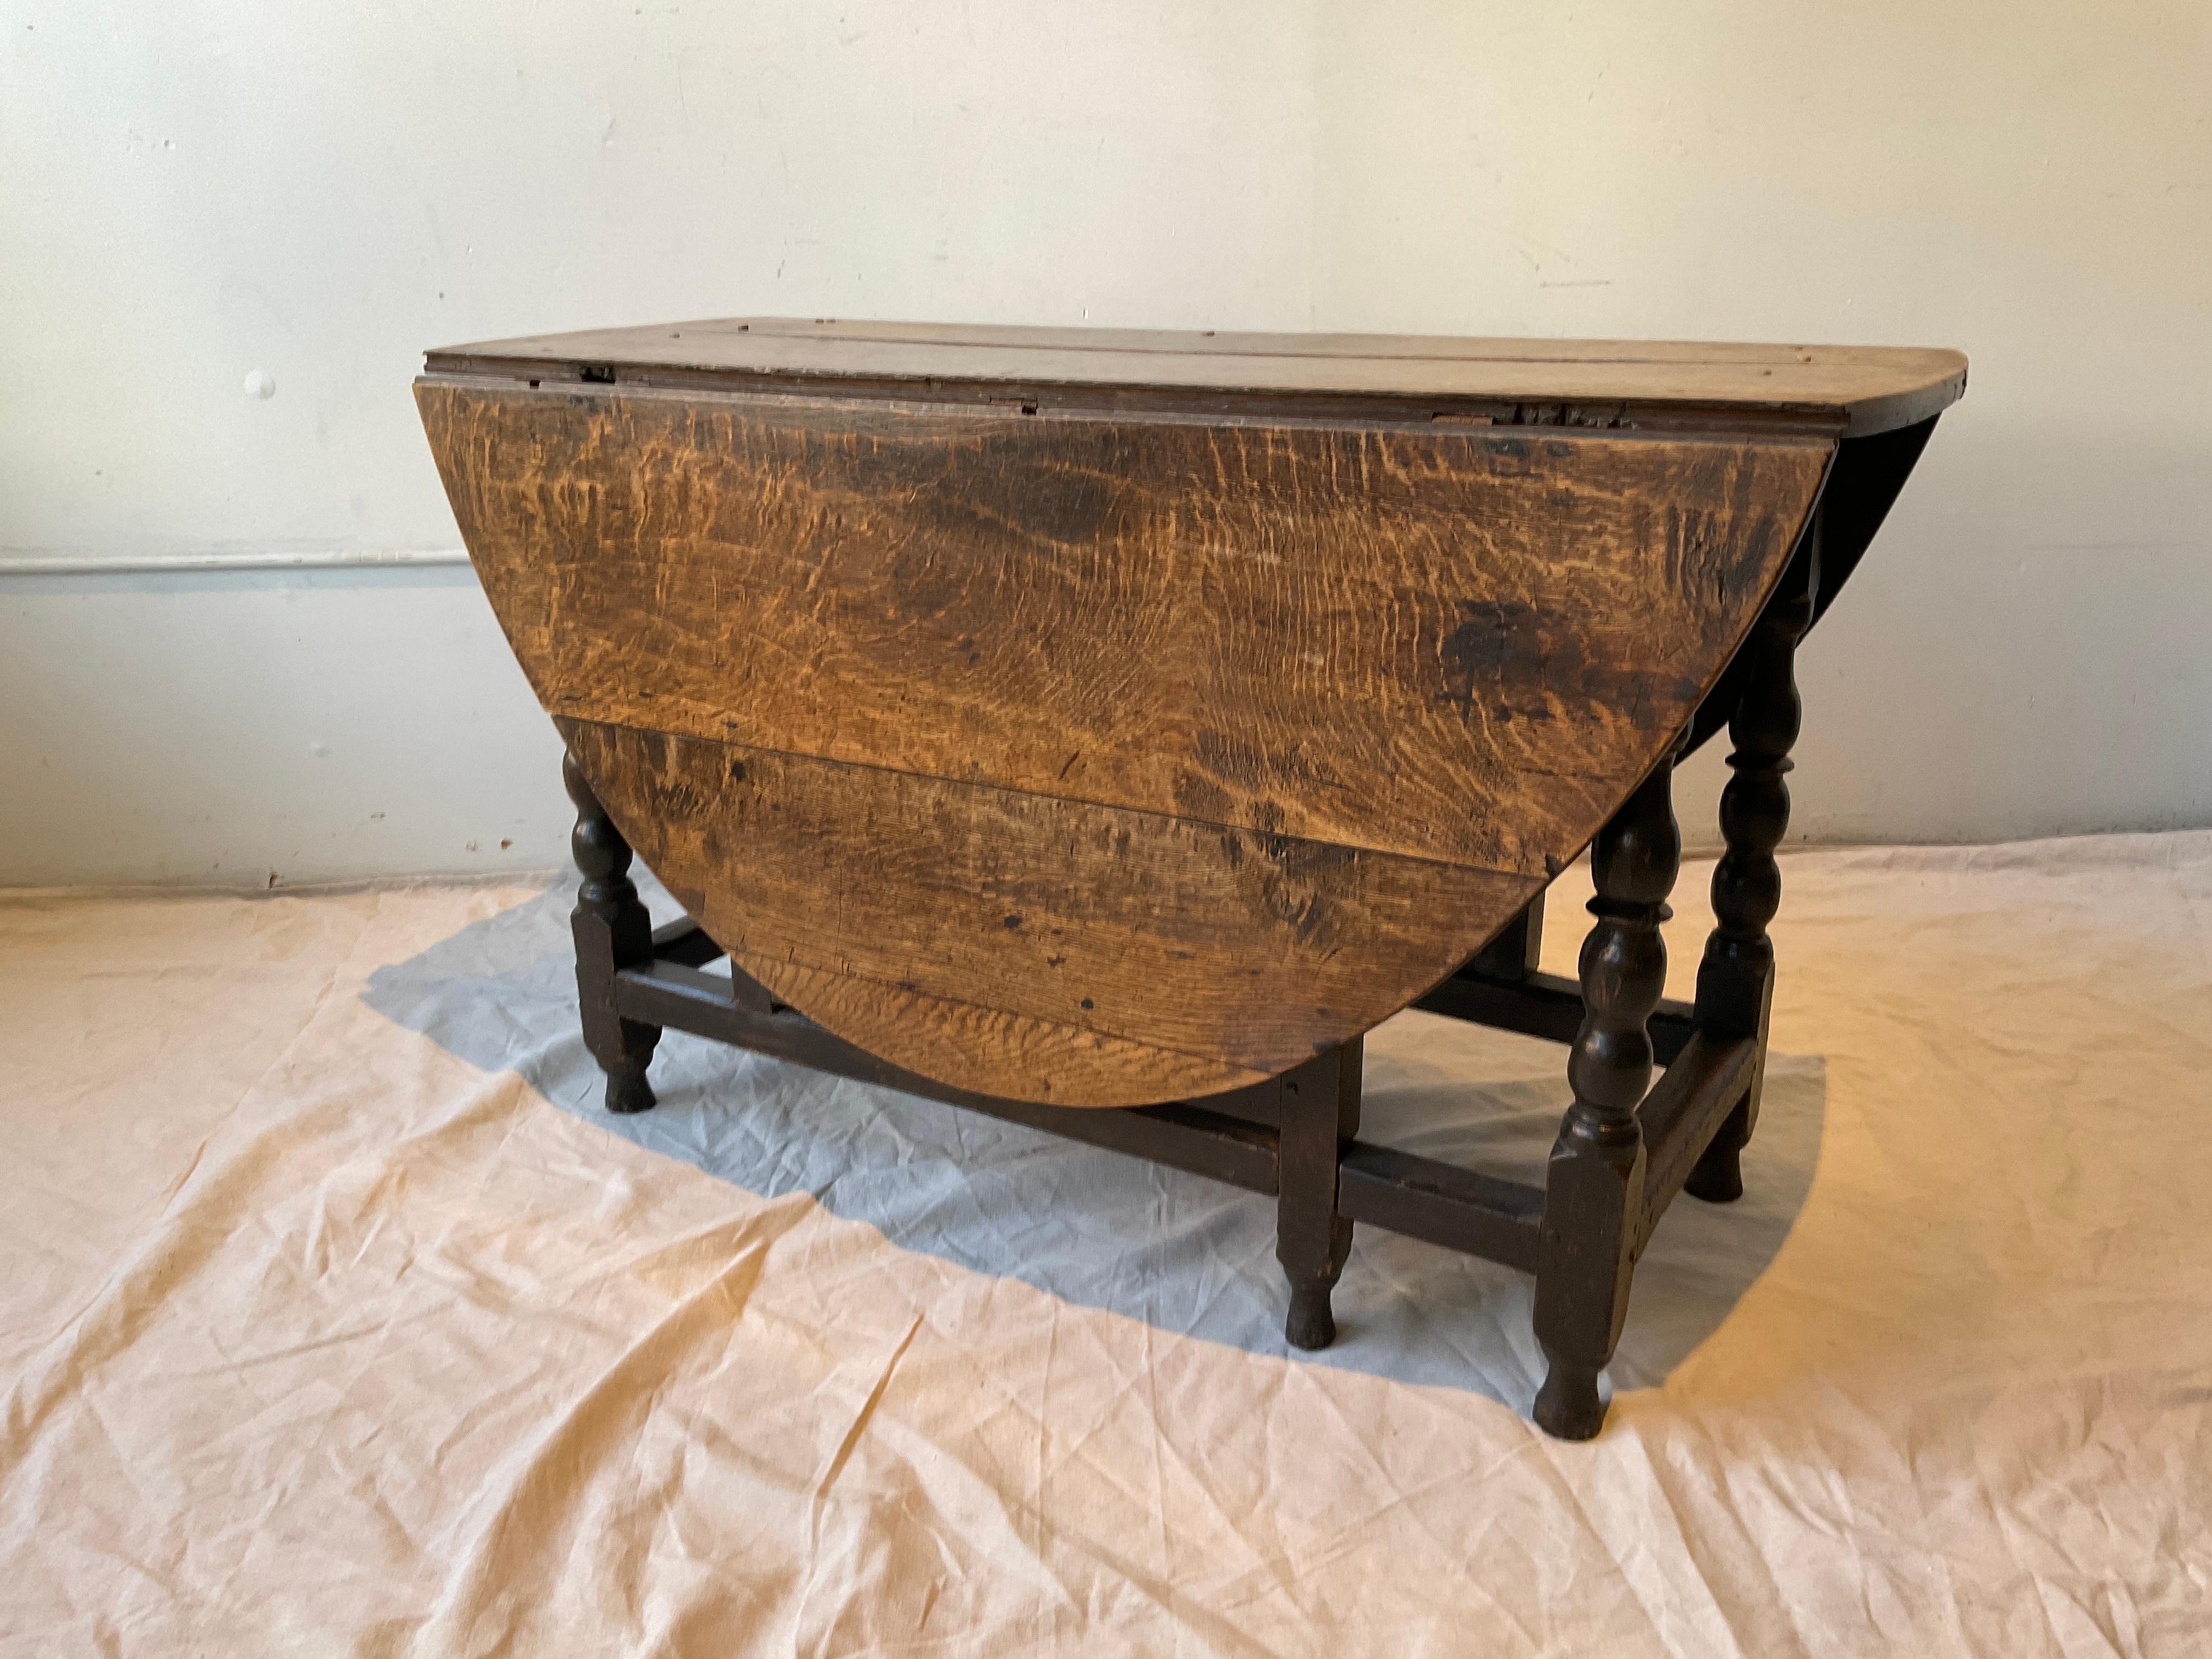 1820s English William and Mary gateleg table. Oak, pegged construction . Wood has a beautiful color to it. Very smooth. When leaves are up, width is 60.5. Depth is 48.5.